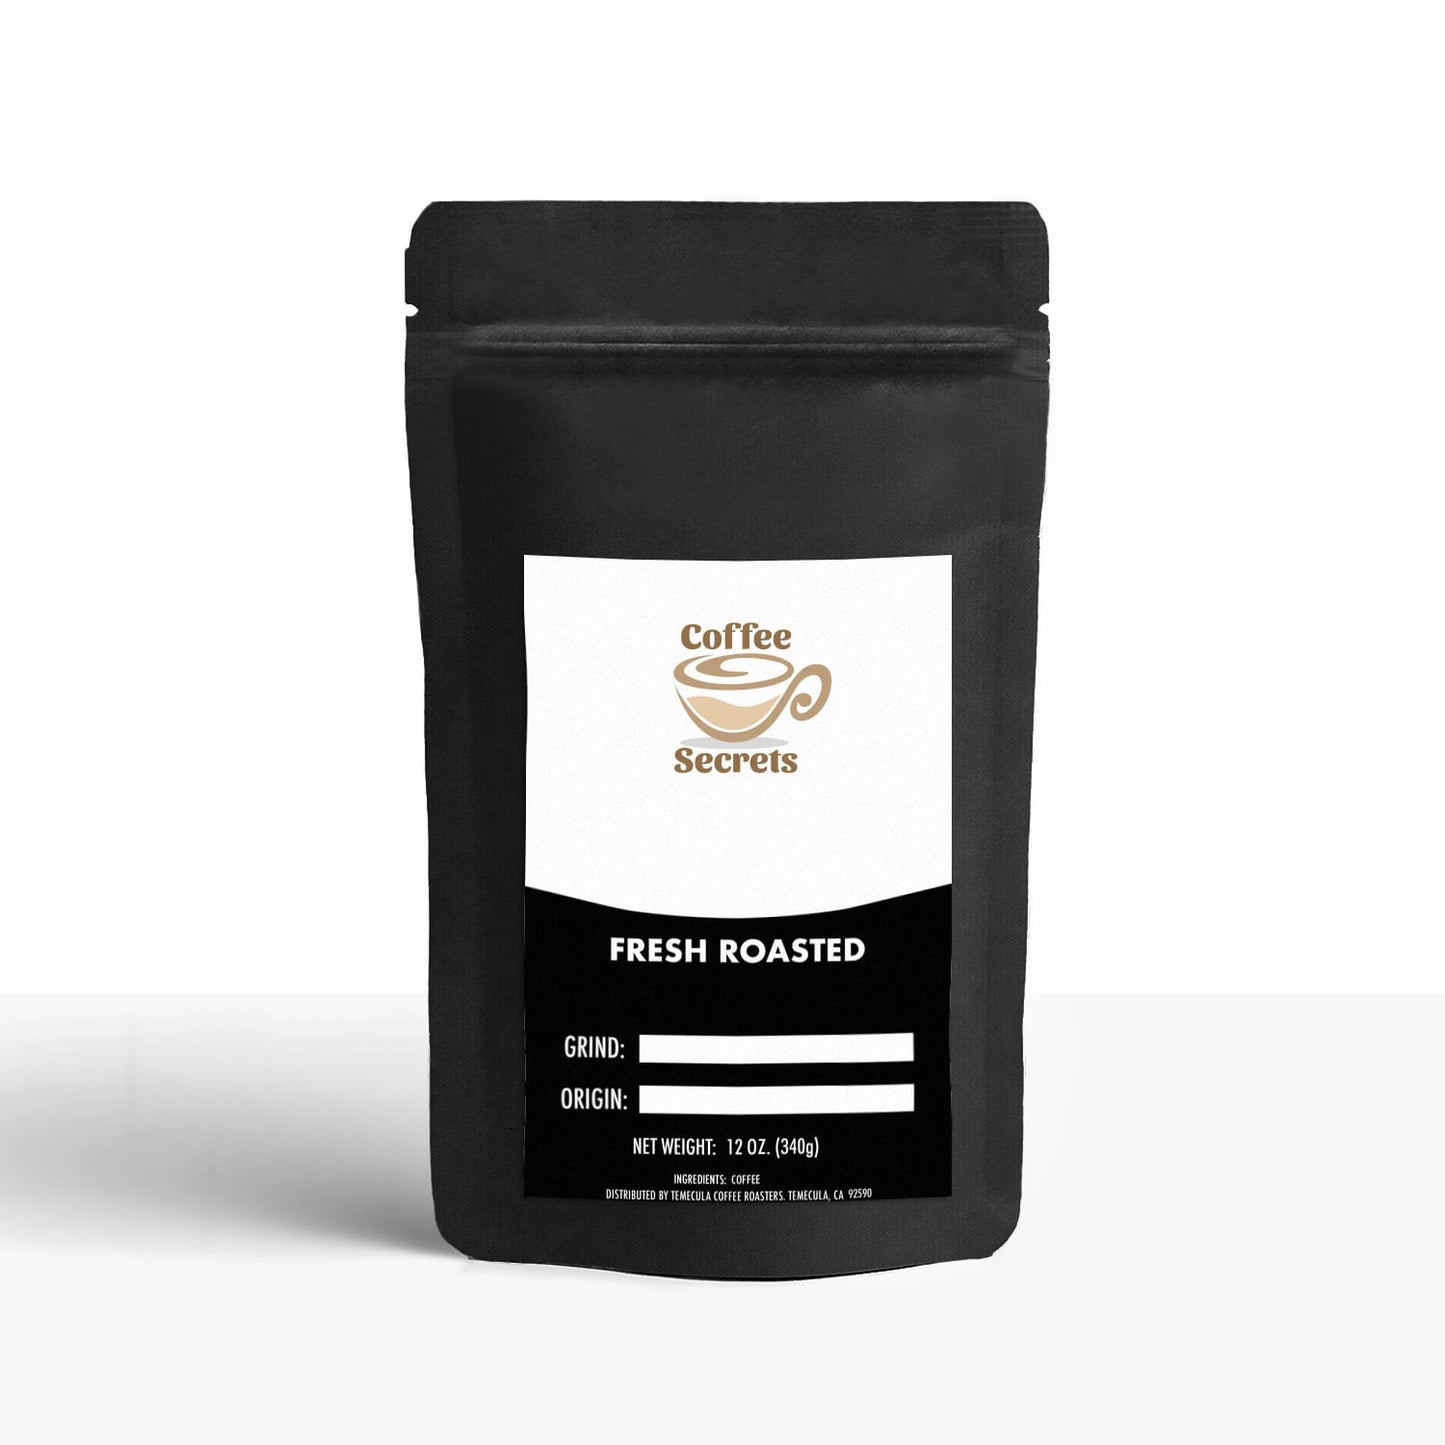 Coffee Secrets product packaging featuring a sleek black bag labeled 'Fresh Roasted', emphasizing the brand's commitment to delivering freshly roasted specialty coffee.